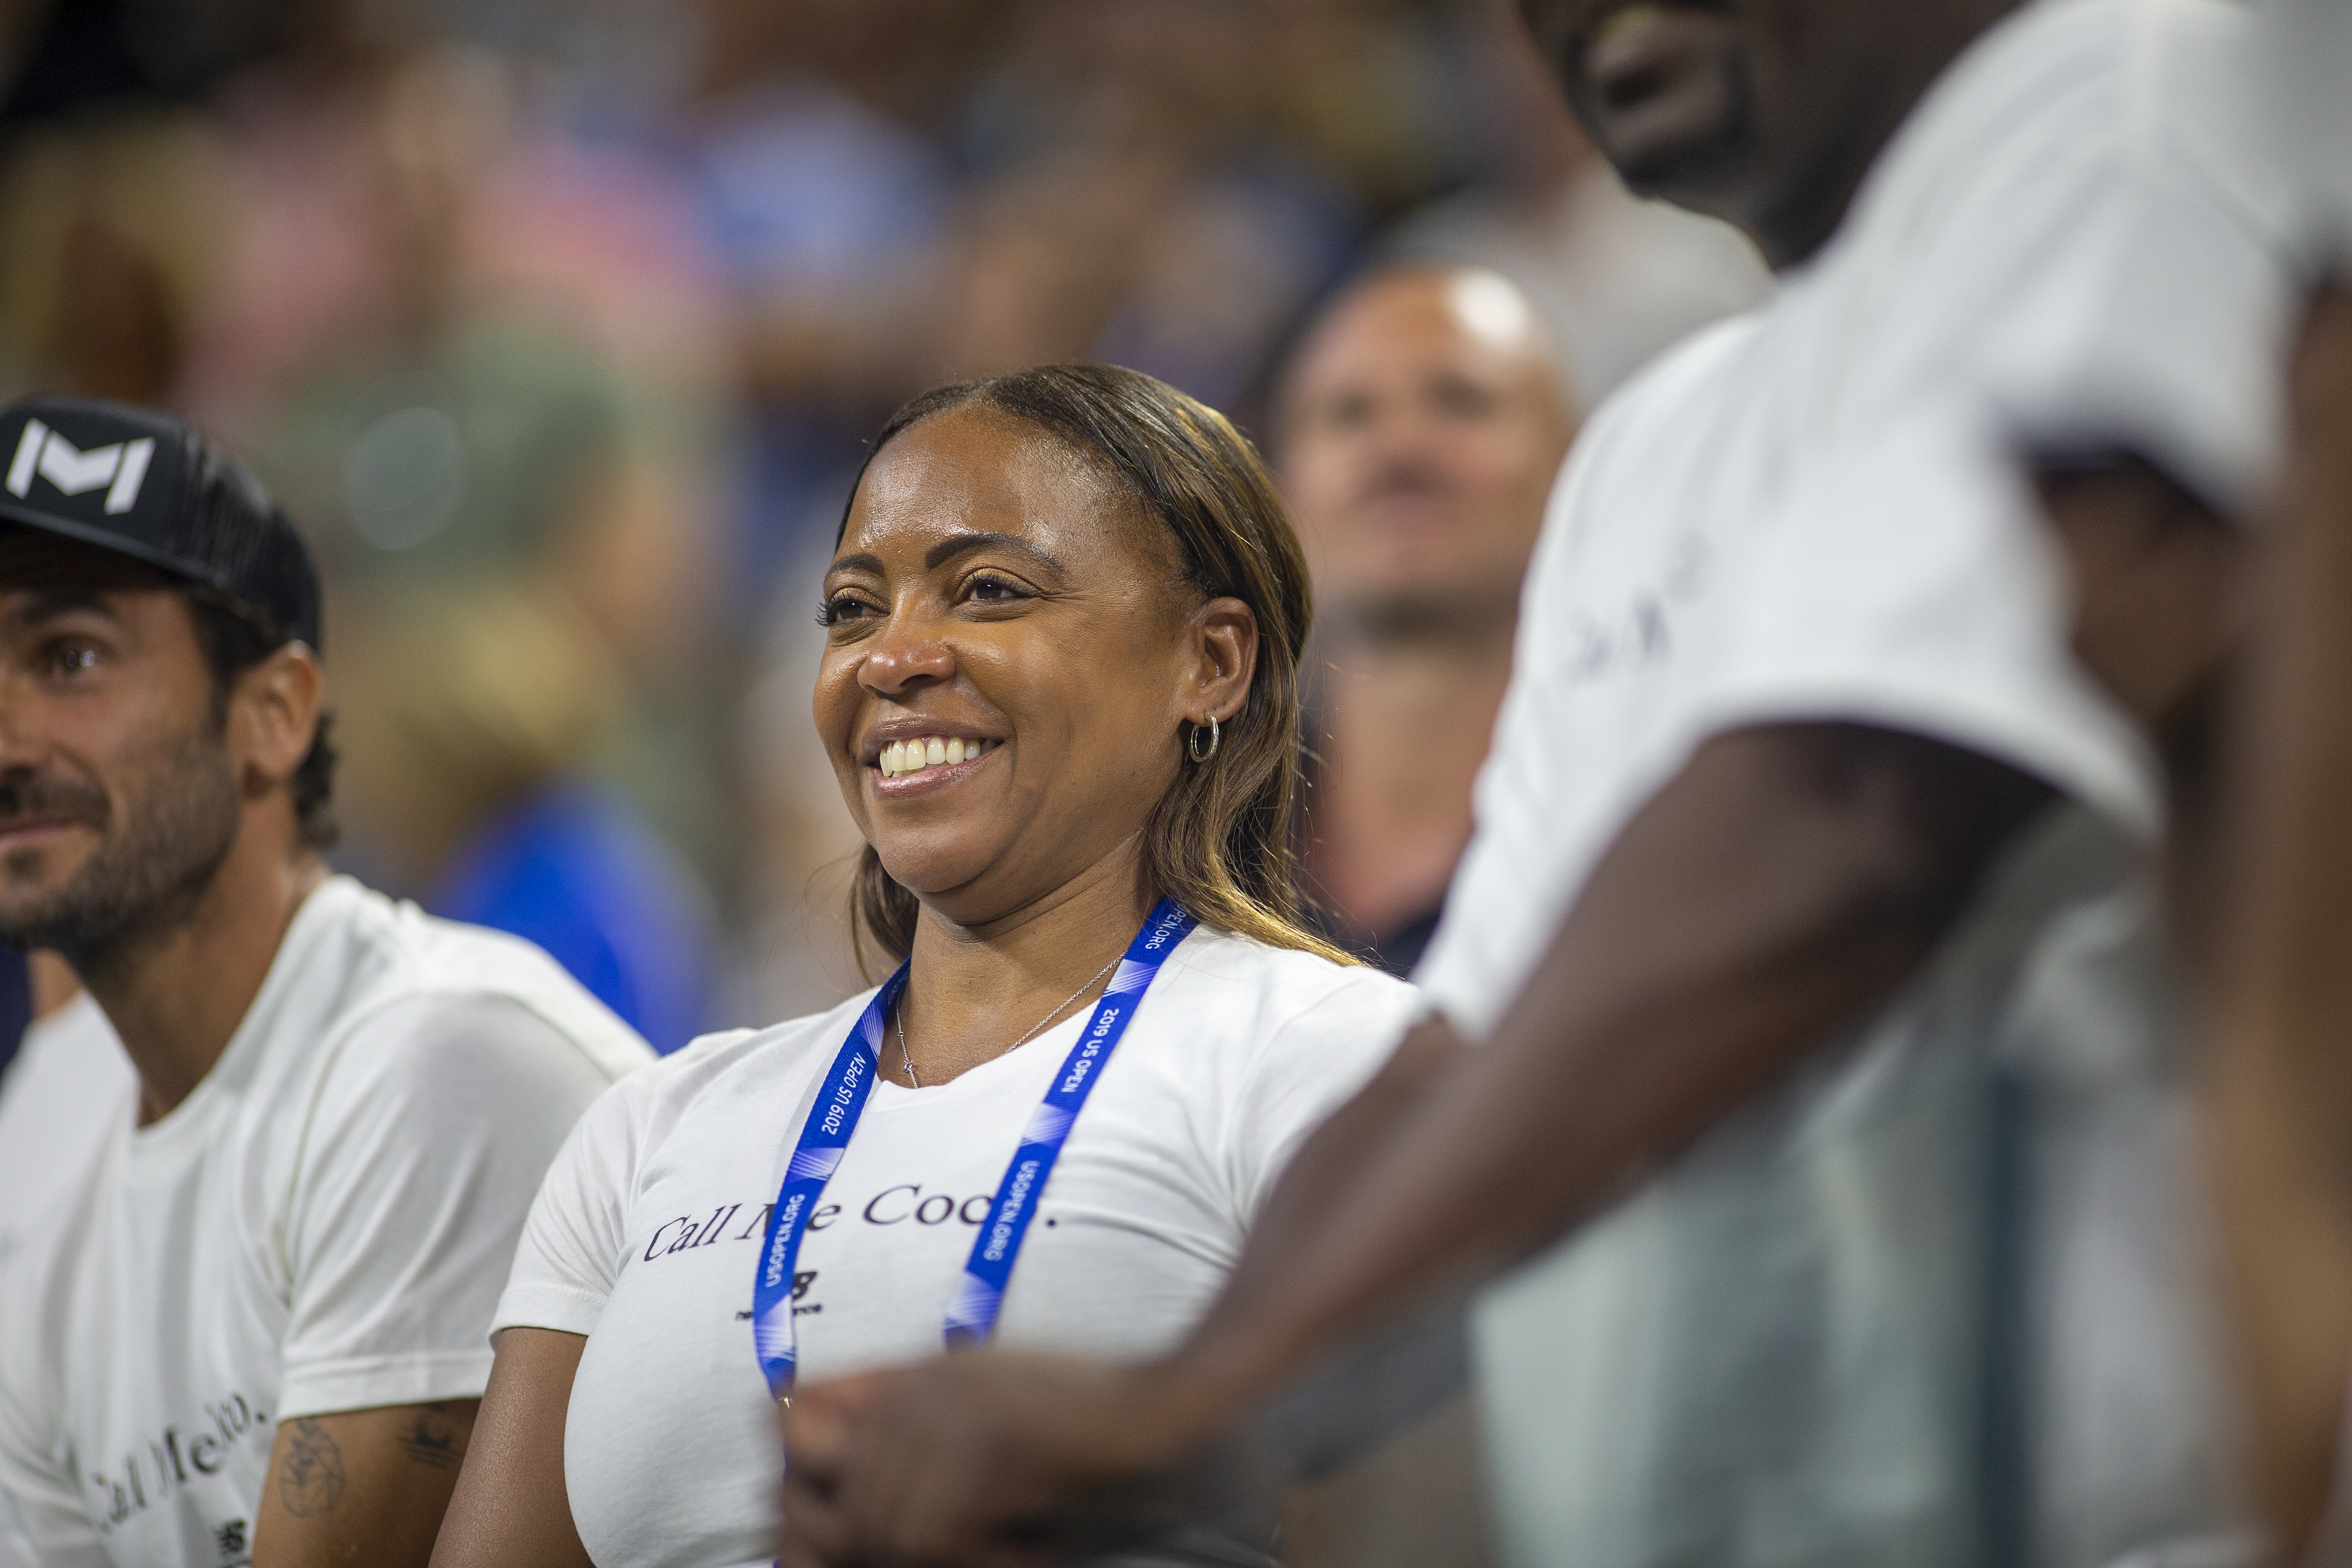 Candi Gauff looks on after Coco Gauff's victory against Time Babos of Hungary in the Women's Singles Round Two match at the Louis Armstrong Stadium at the 2019 US Open Tennis Tournament on August 29, 2019, in Queens, New York City. | Source: Getty Images